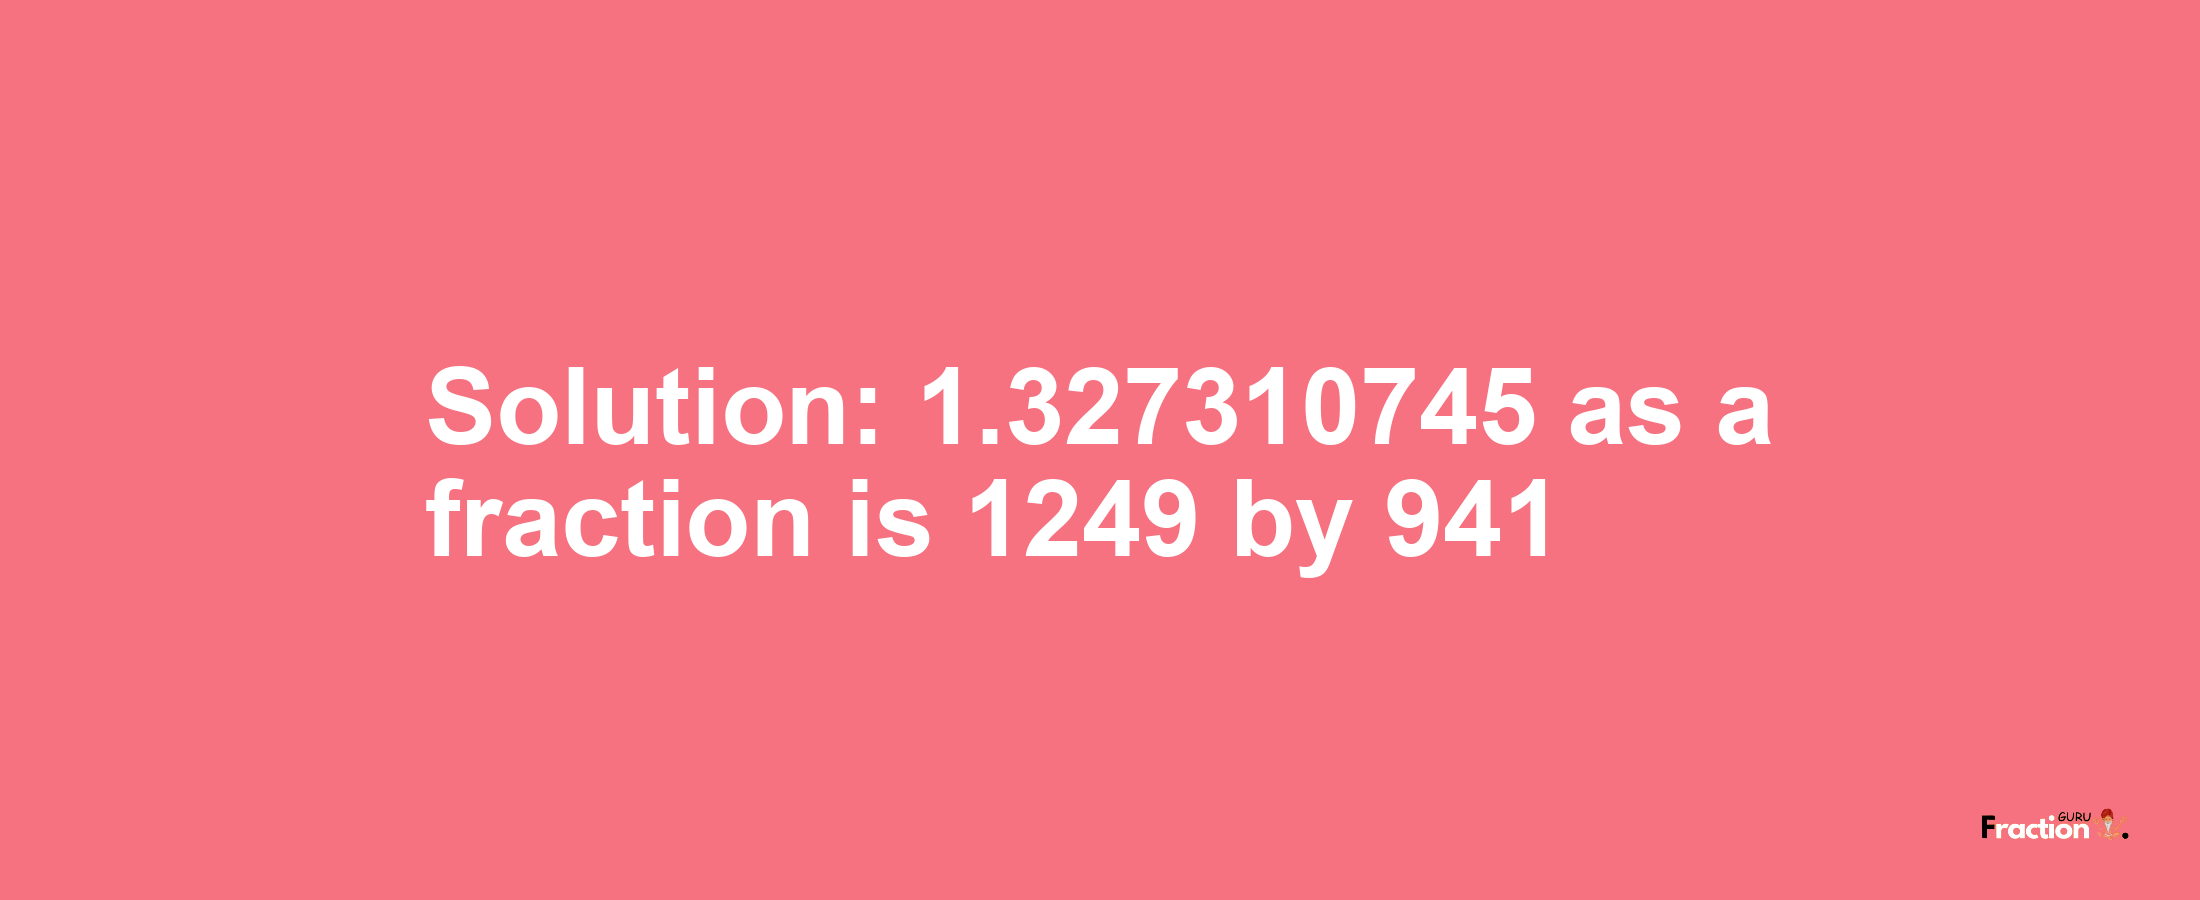 Solution:1.327310745 as a fraction is 1249/941